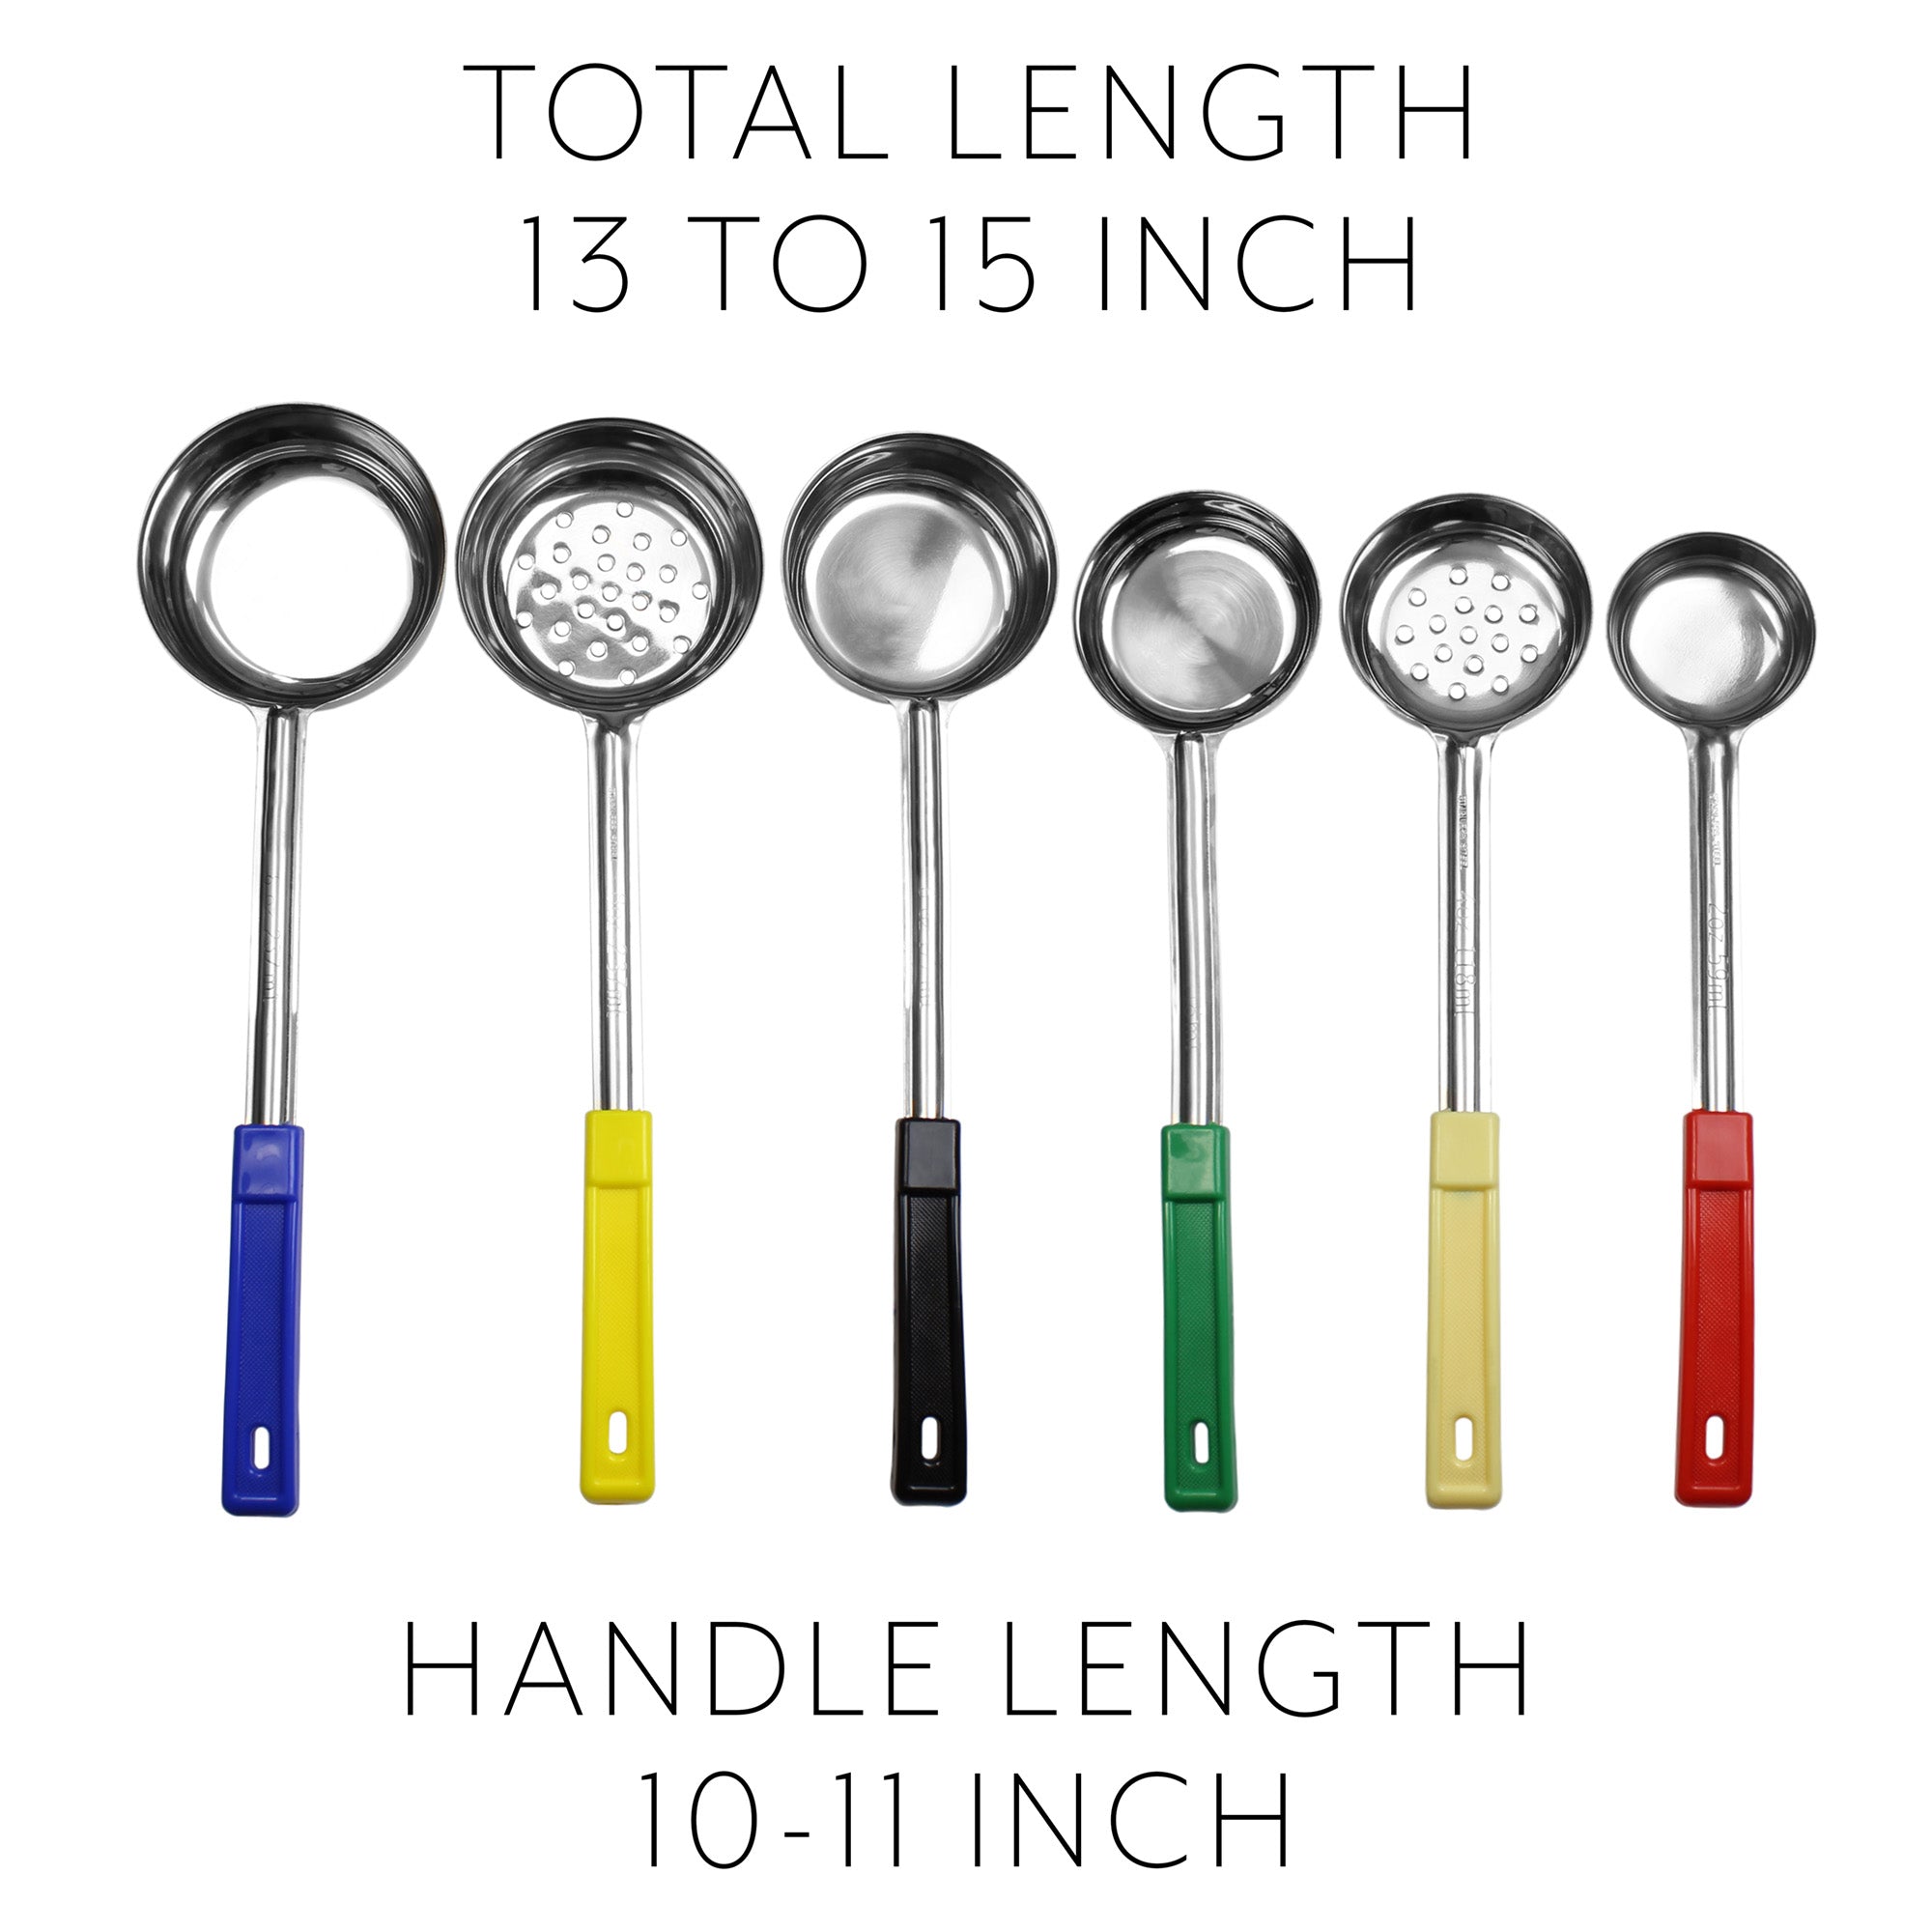 Portion Control Ladles Measuring Spoon Stainless Steel Soup Spoon